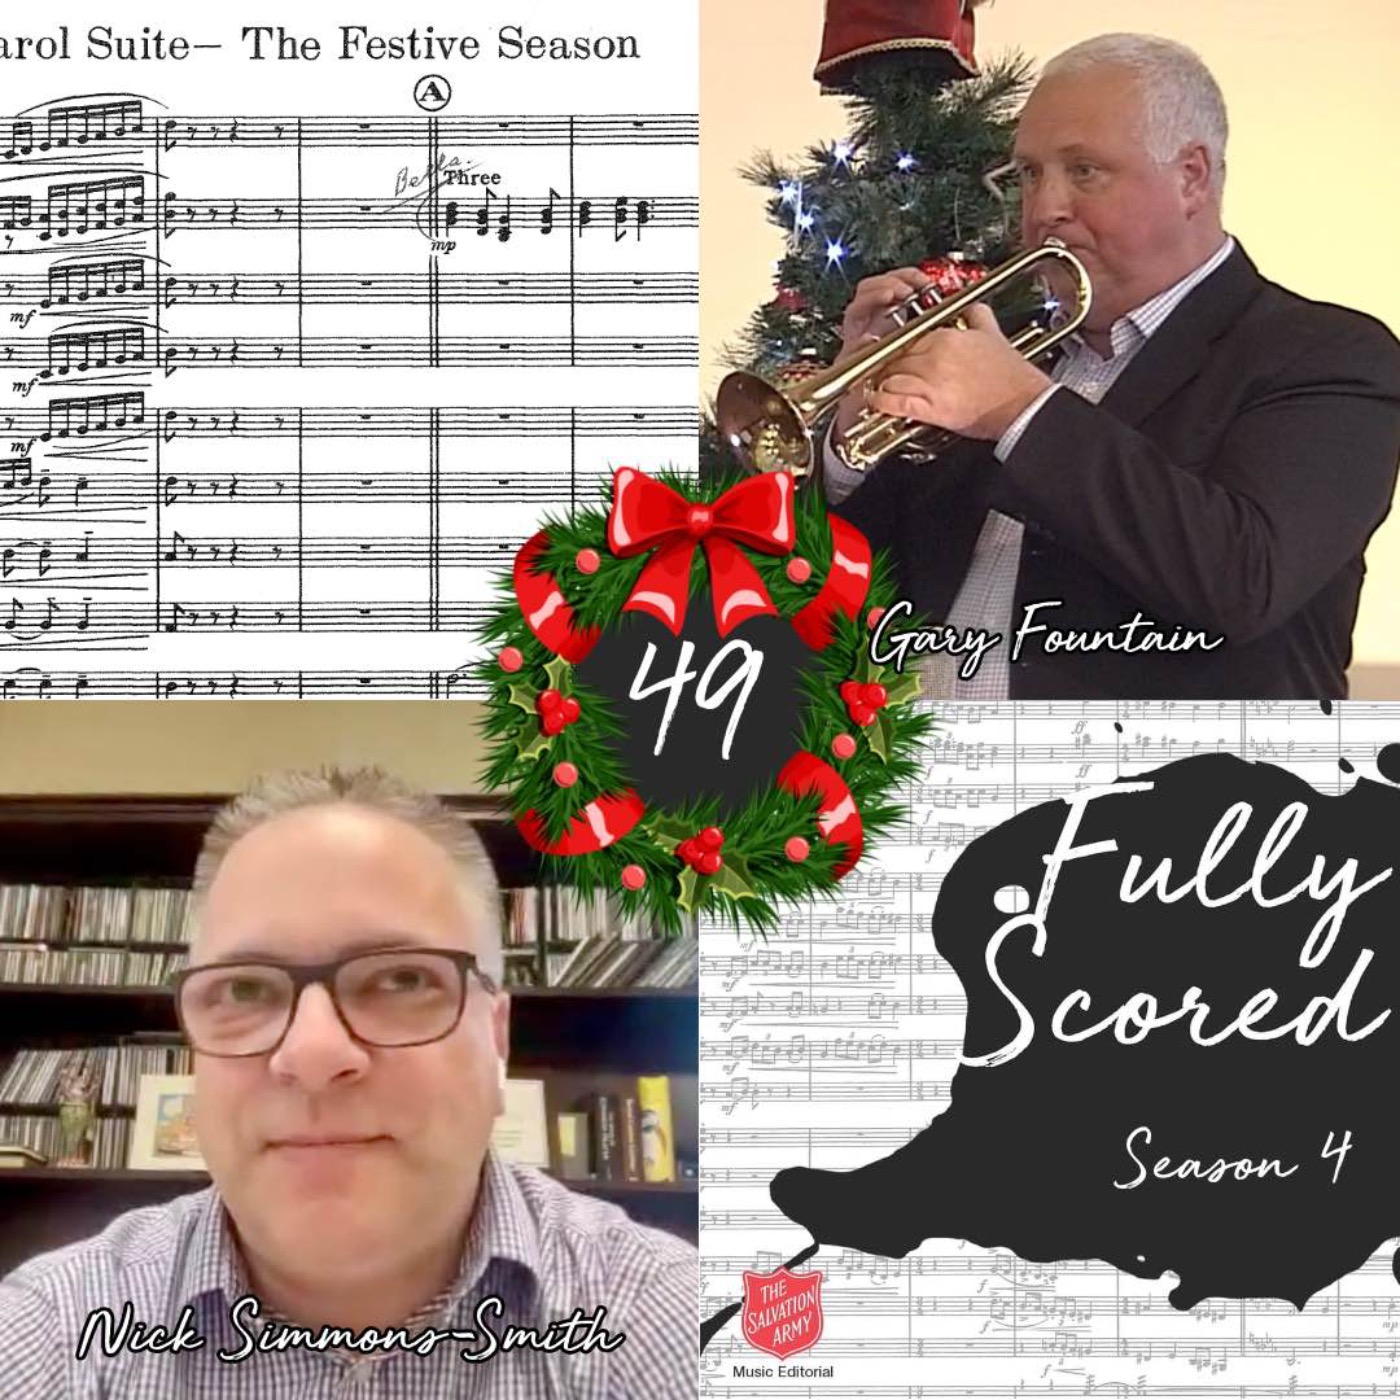 Fully Scored | Ep. 49 (Gary Fountain & Nick Simmons-Smith)